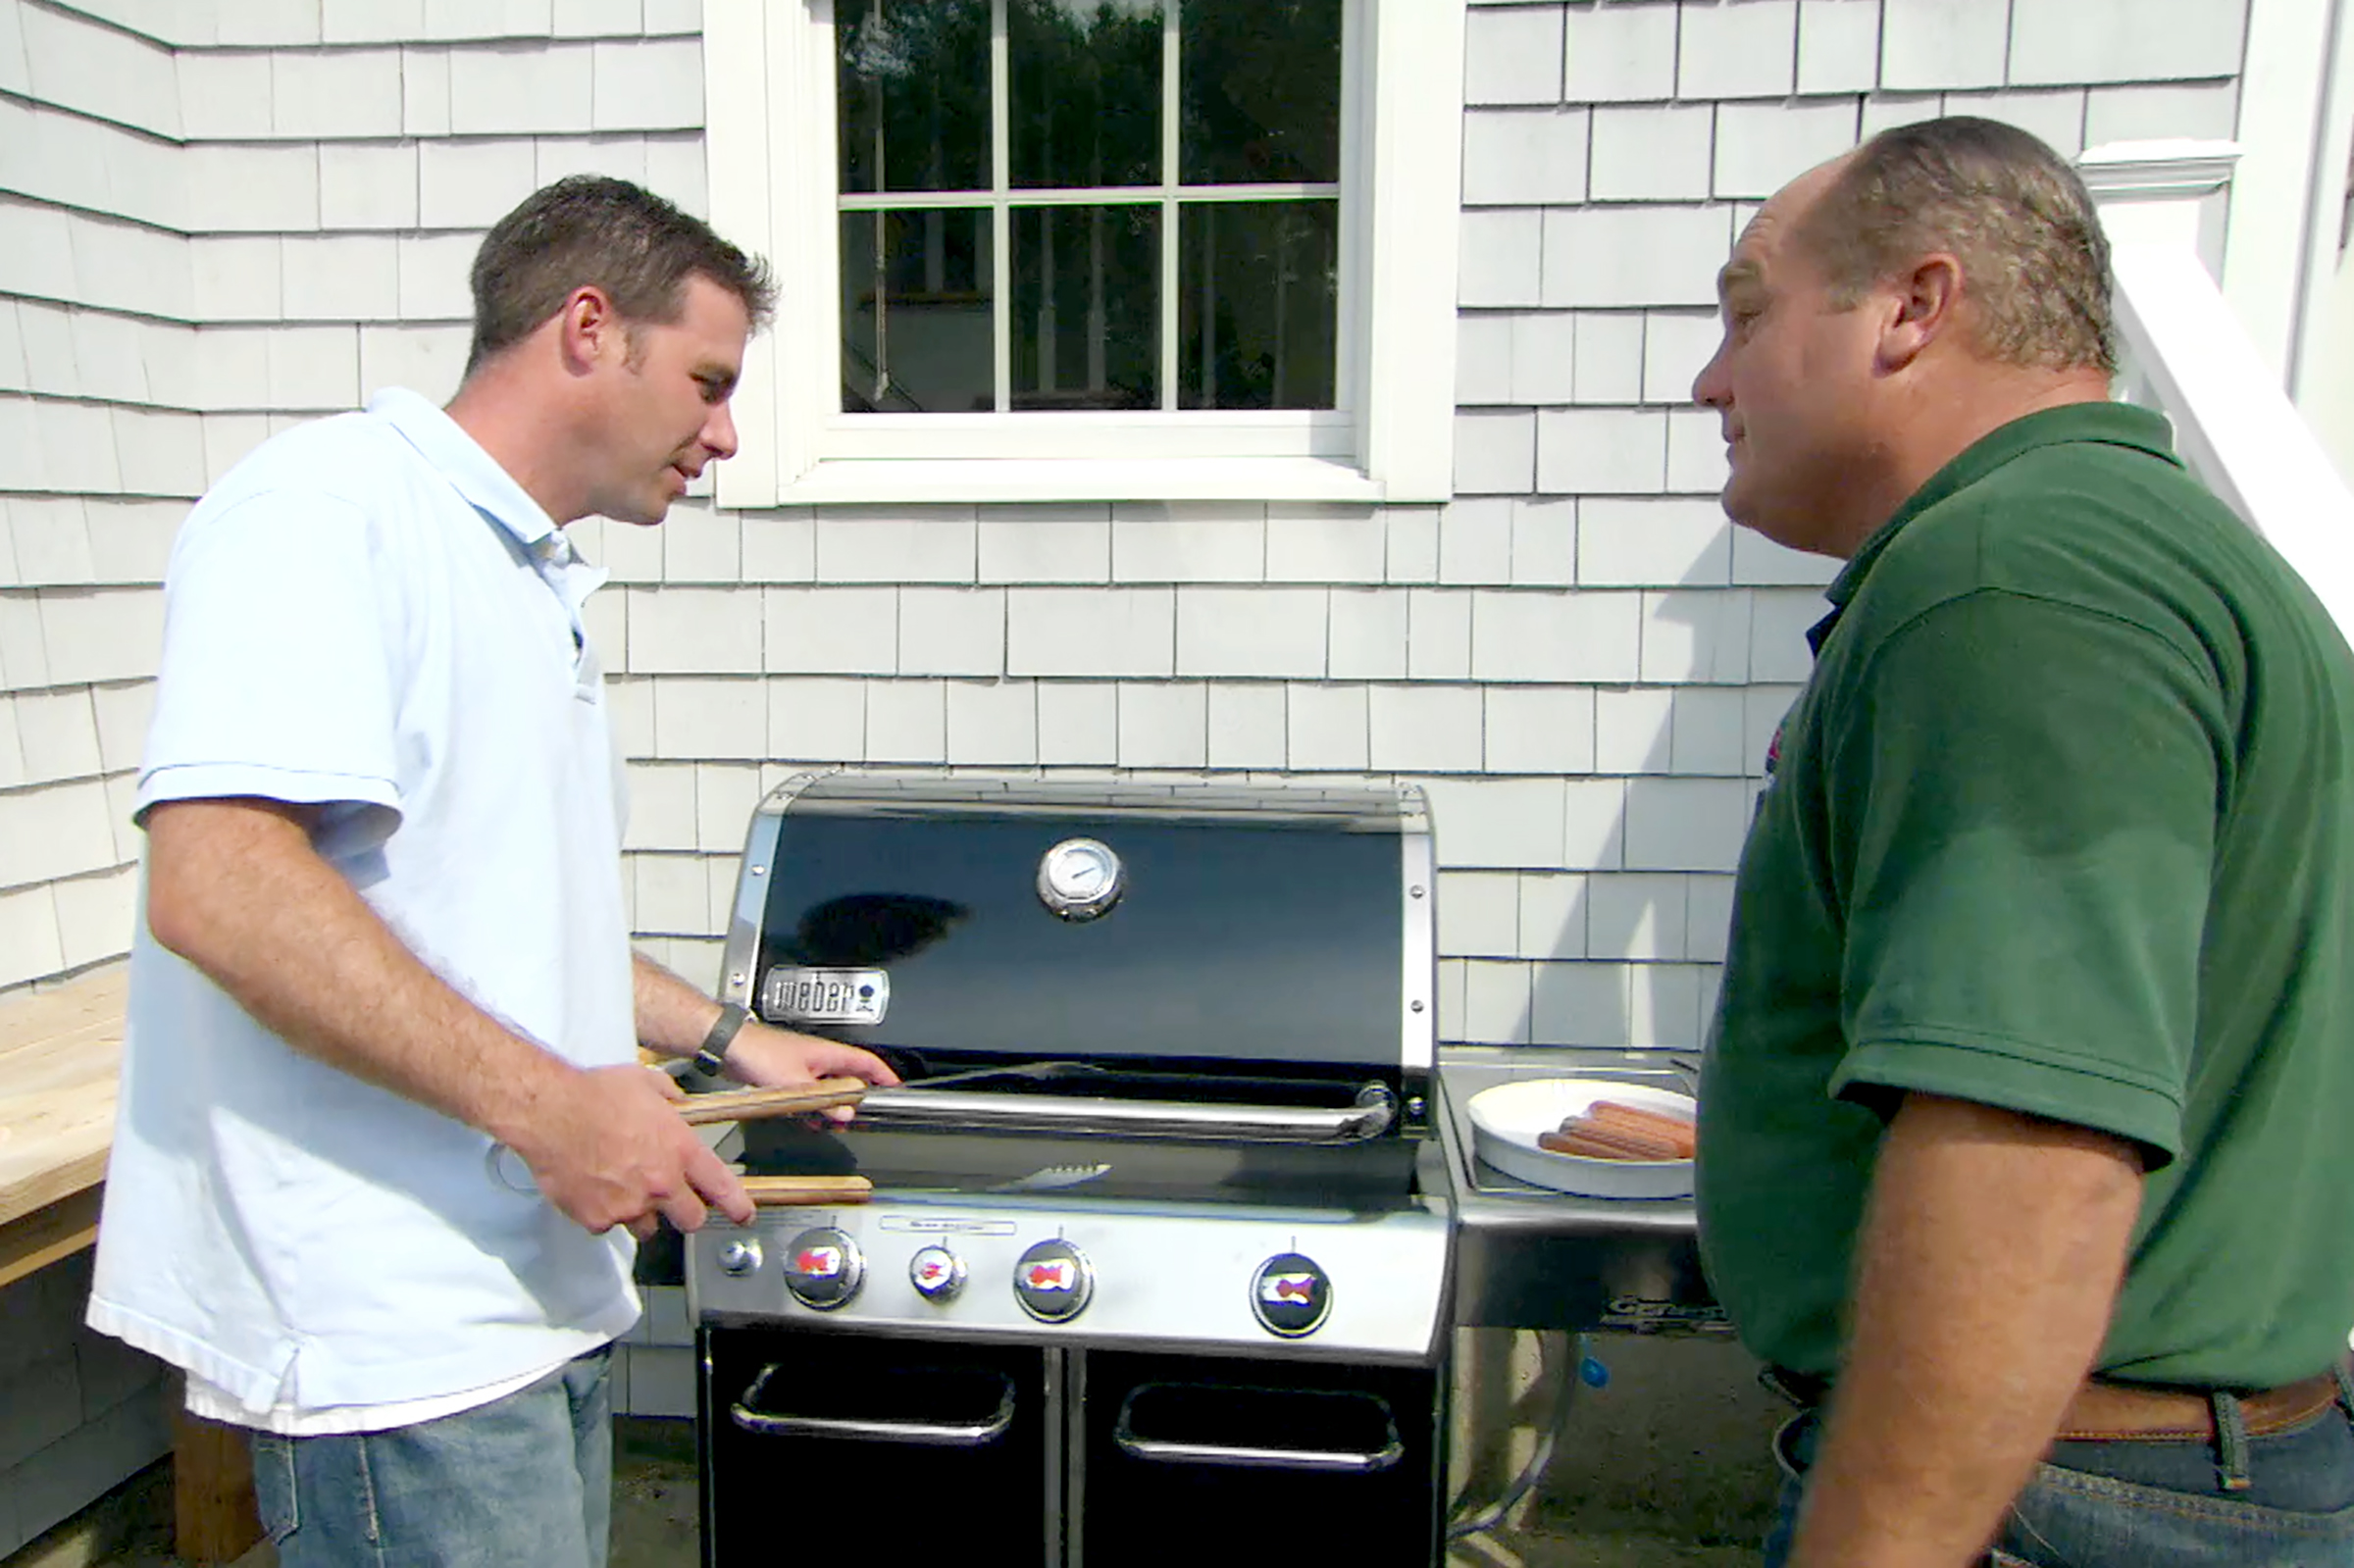 Installing a natural gas barbecue grill